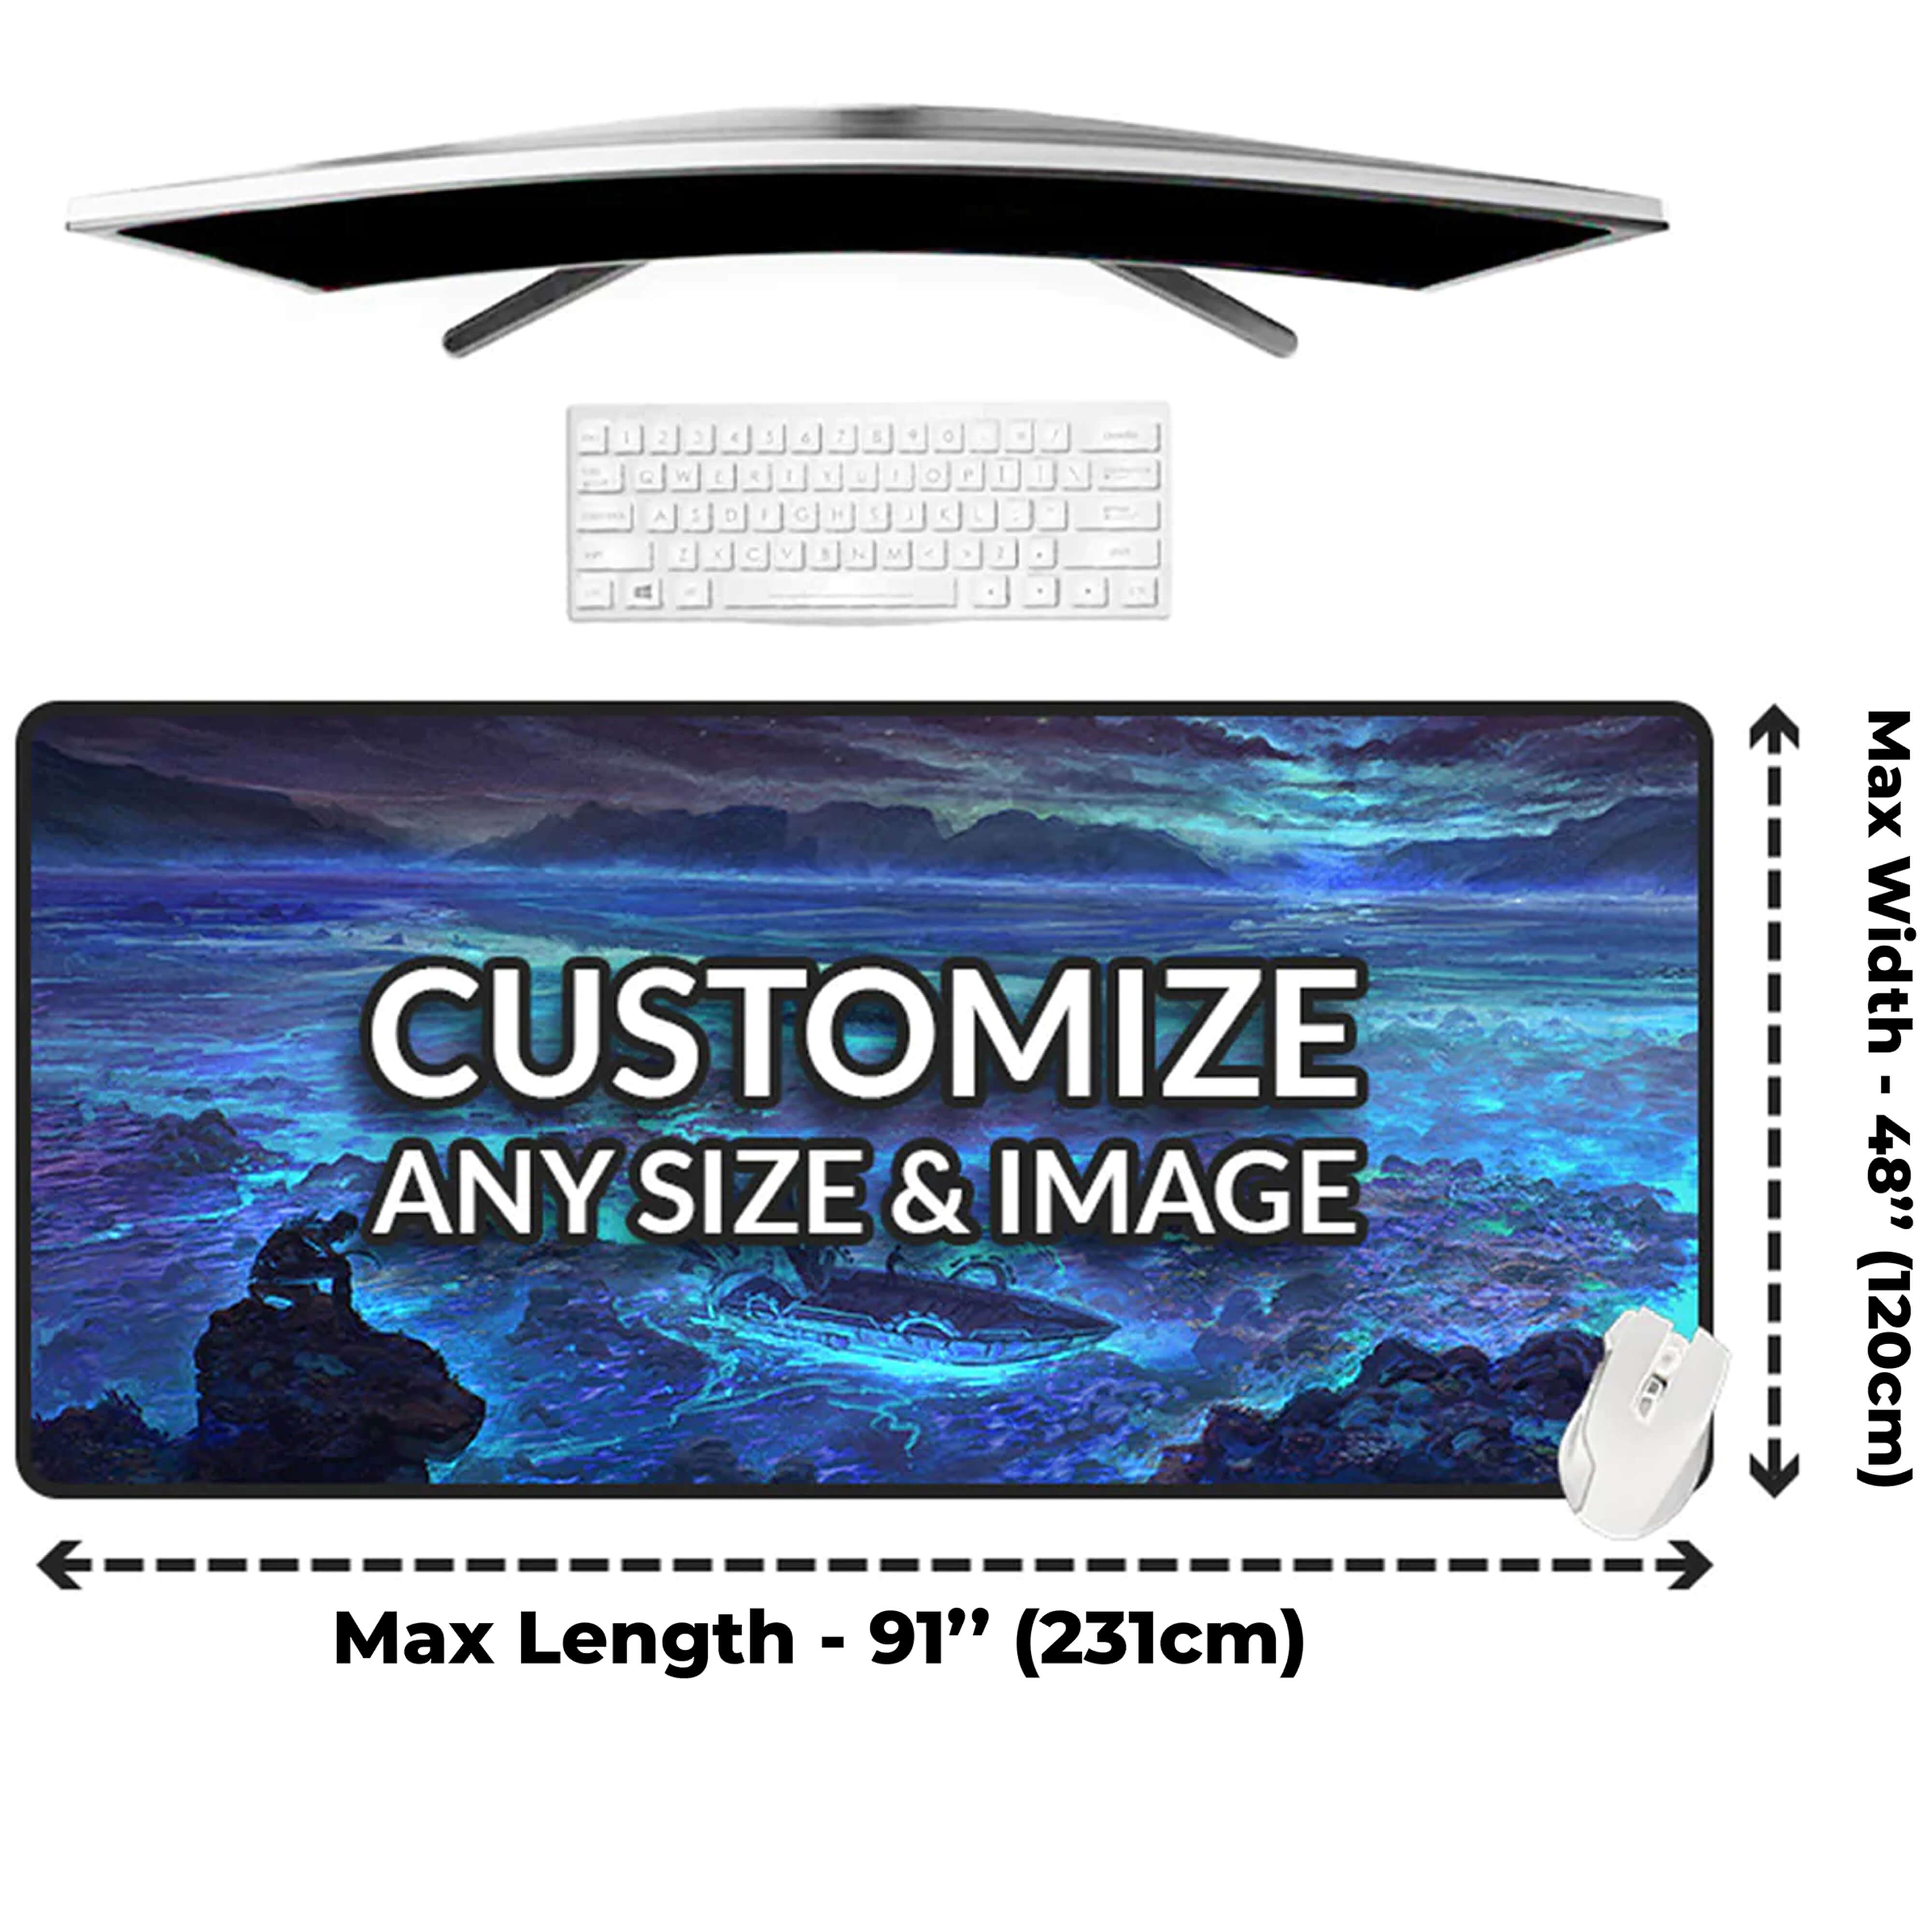 Make Your Own Custom Size Mouse Pad – Your Playmat